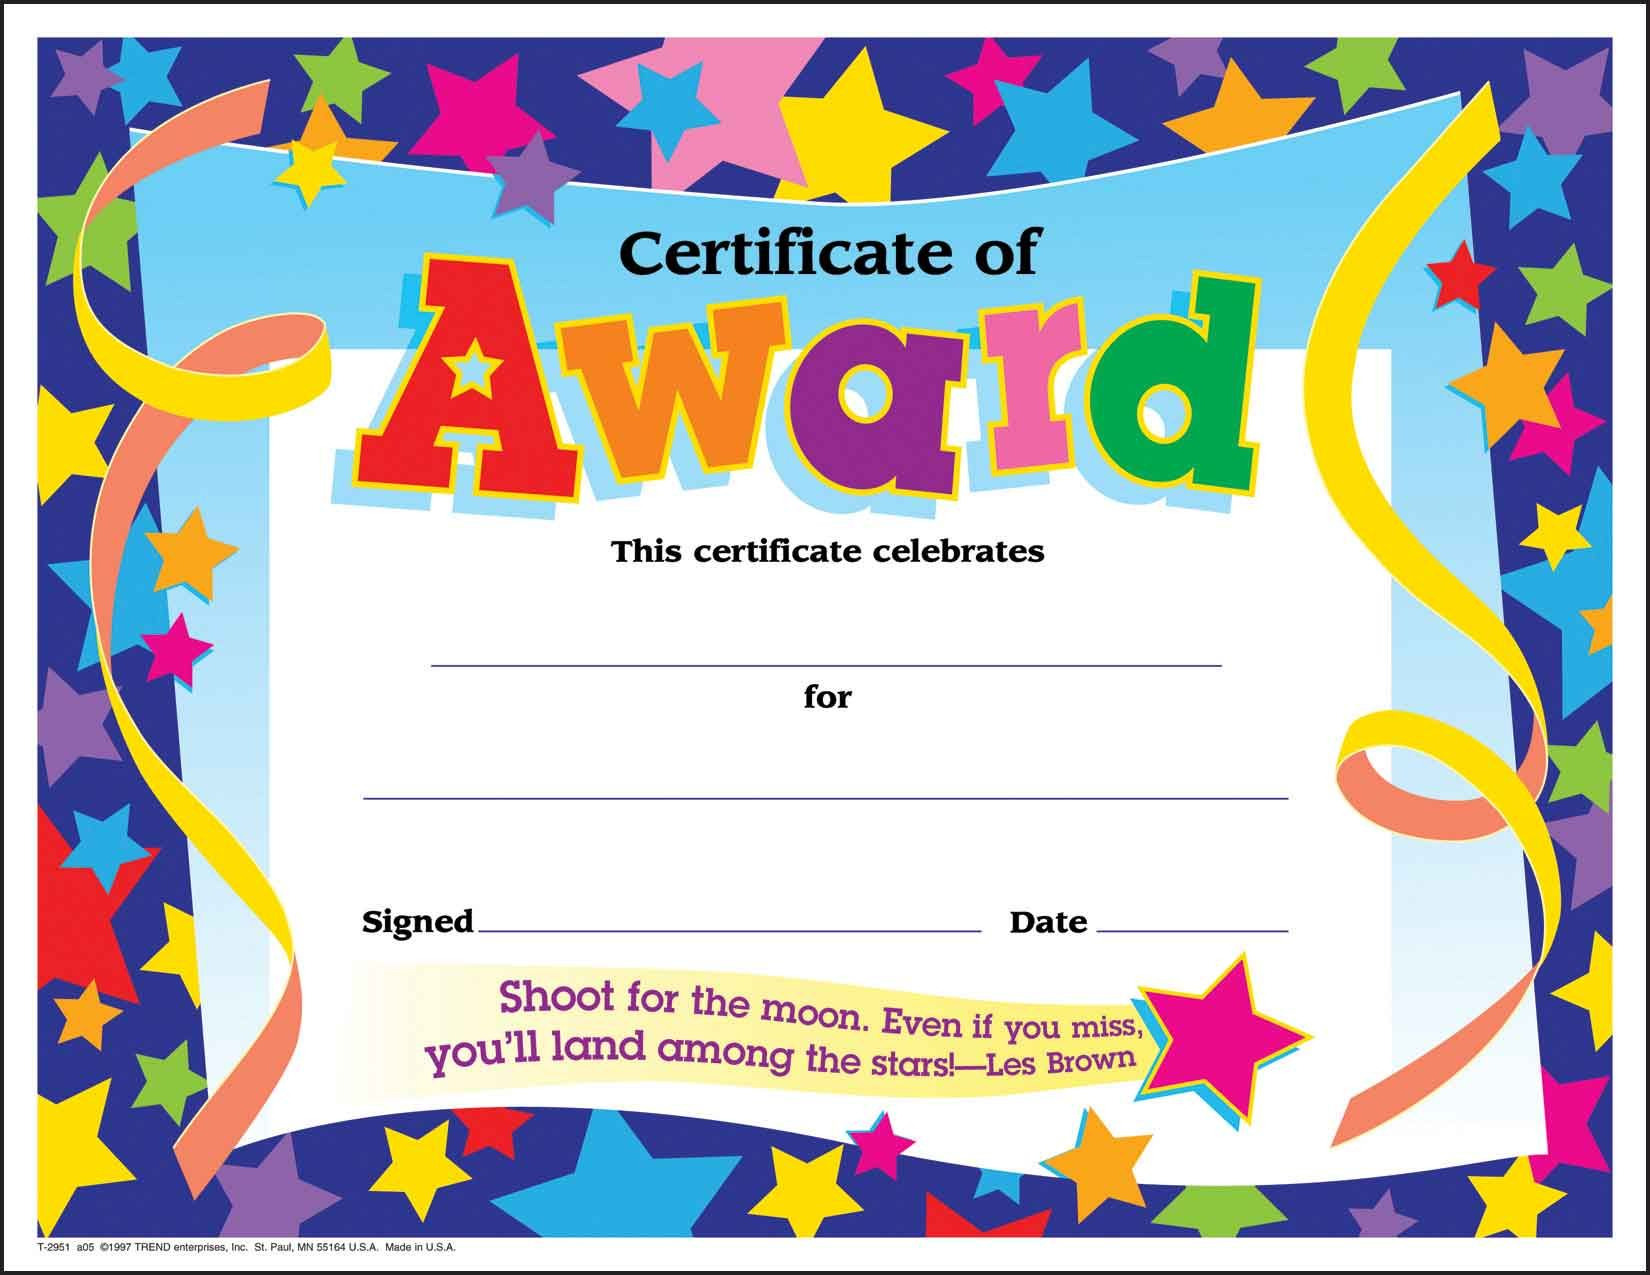 Certificate Template For Kids Free Certificate Templates - Free Printable Certificates